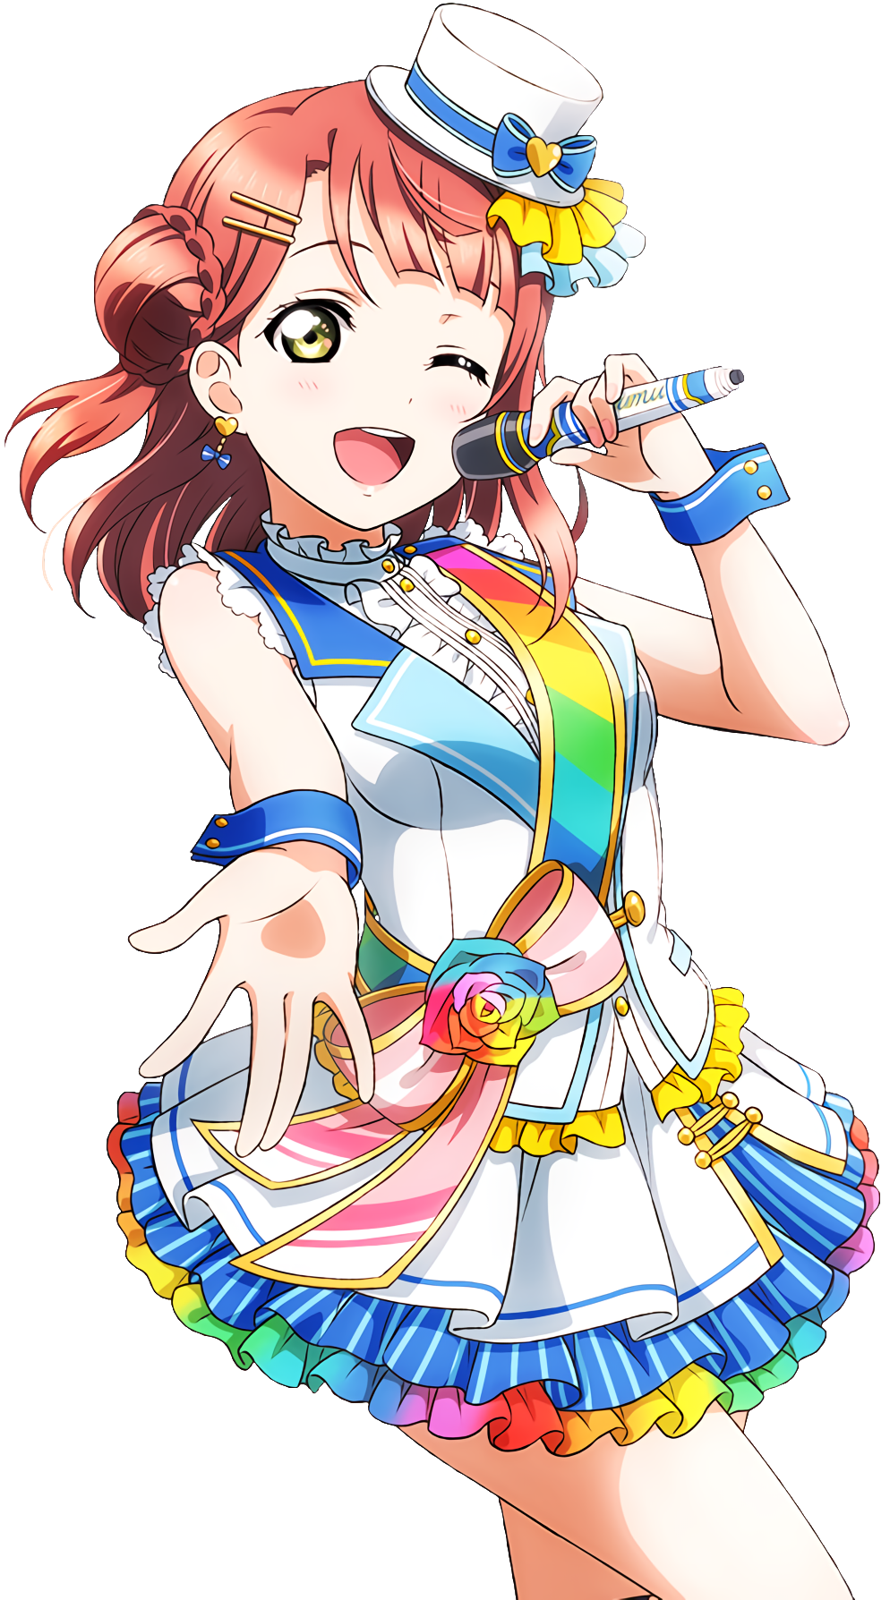 I almost forgot to post Ayumu's png, but there it is!